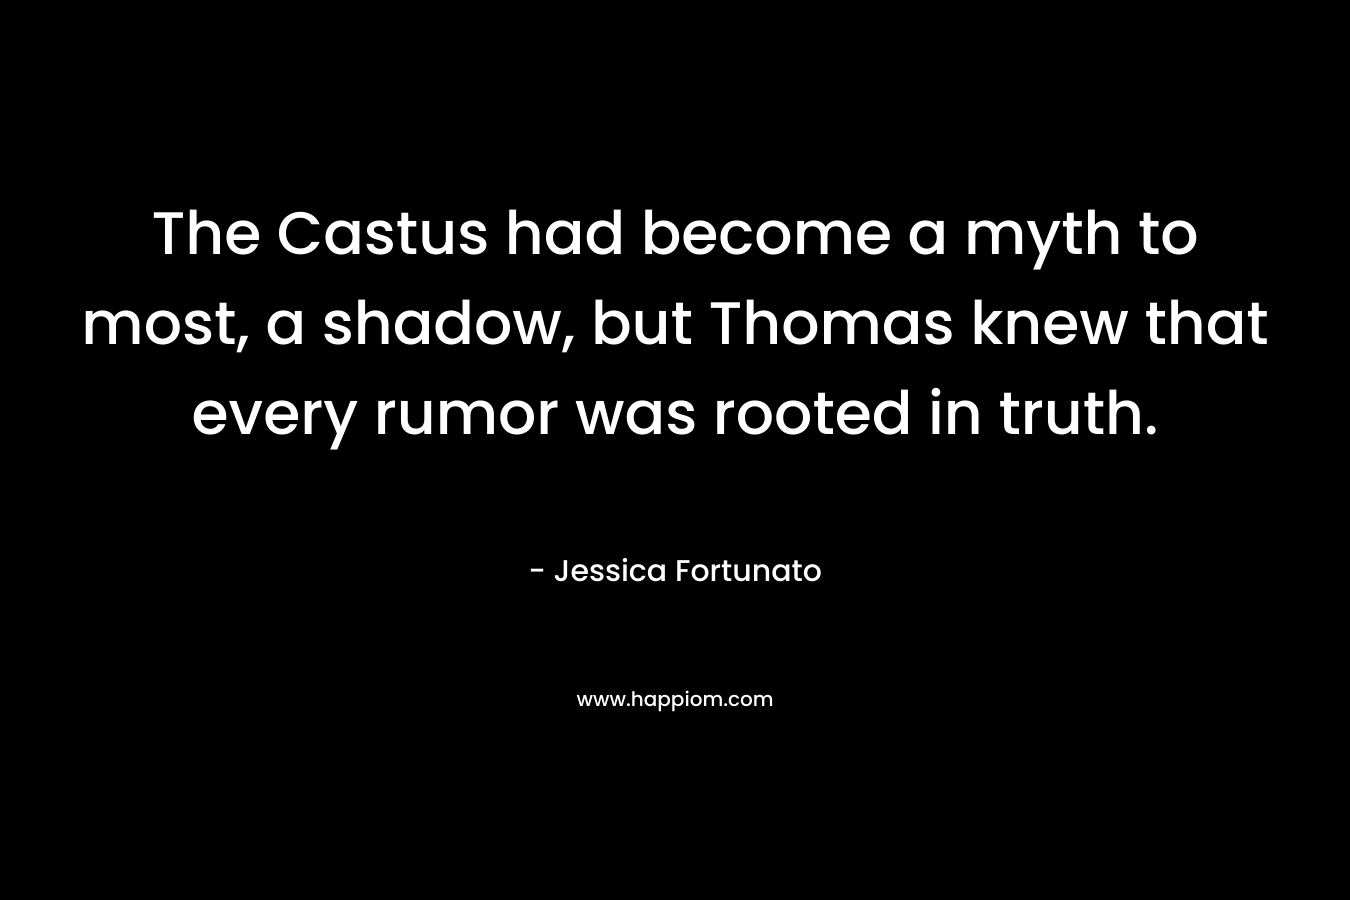 The Castus had become a myth to most, a shadow, but Thomas knew that every rumor was rooted in truth.